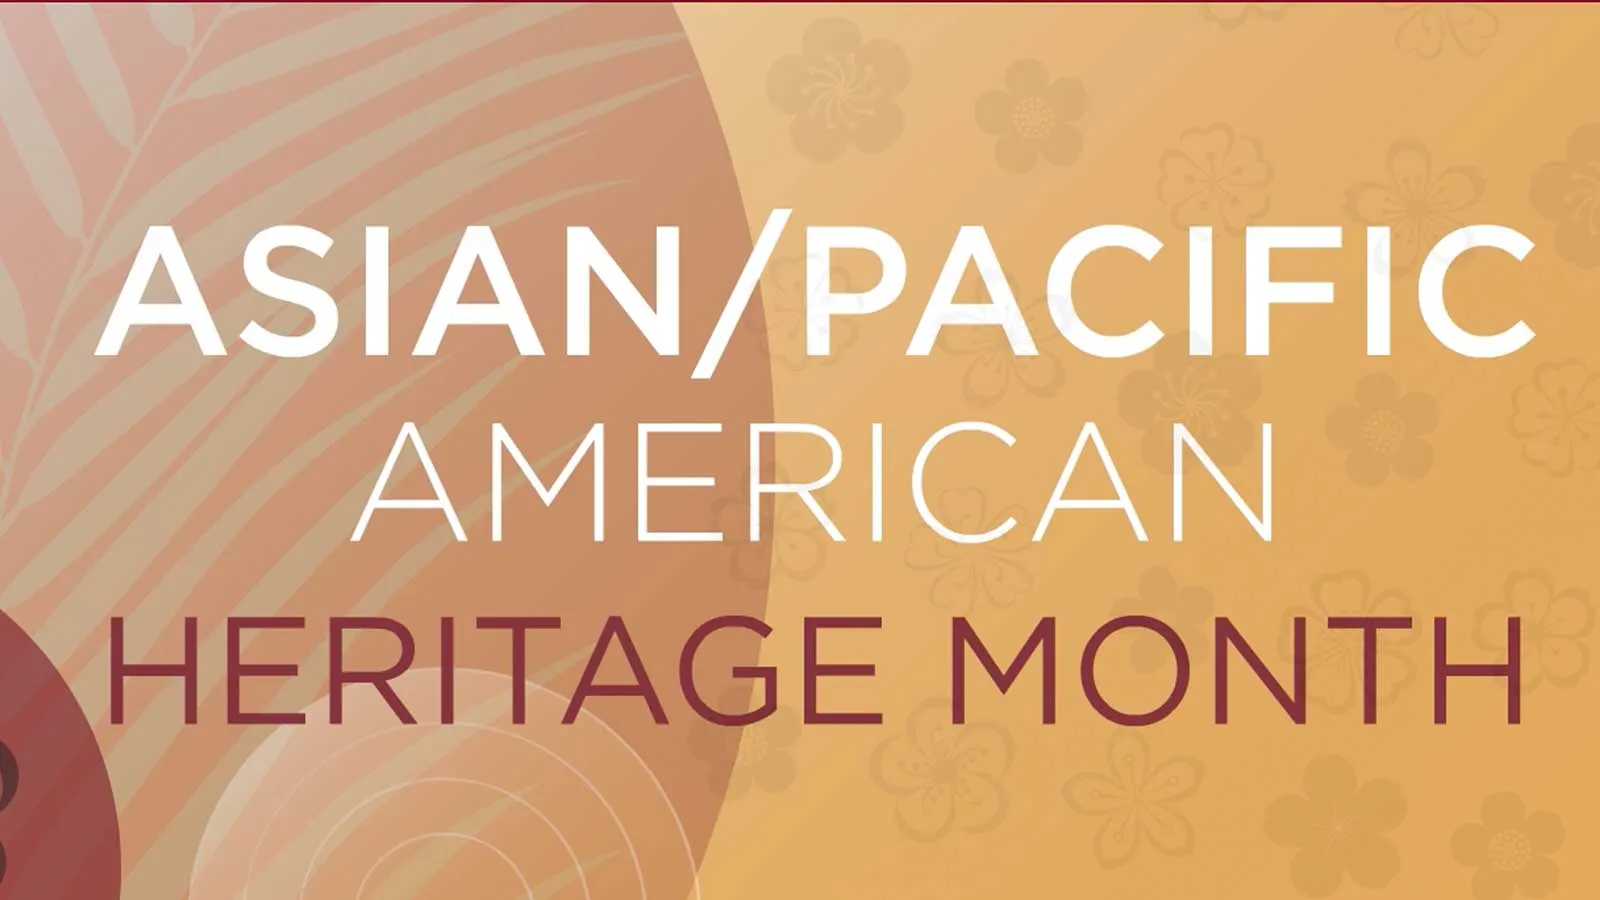 Asian and Pacific American Heritage Month Graphic with a Botanical Motif